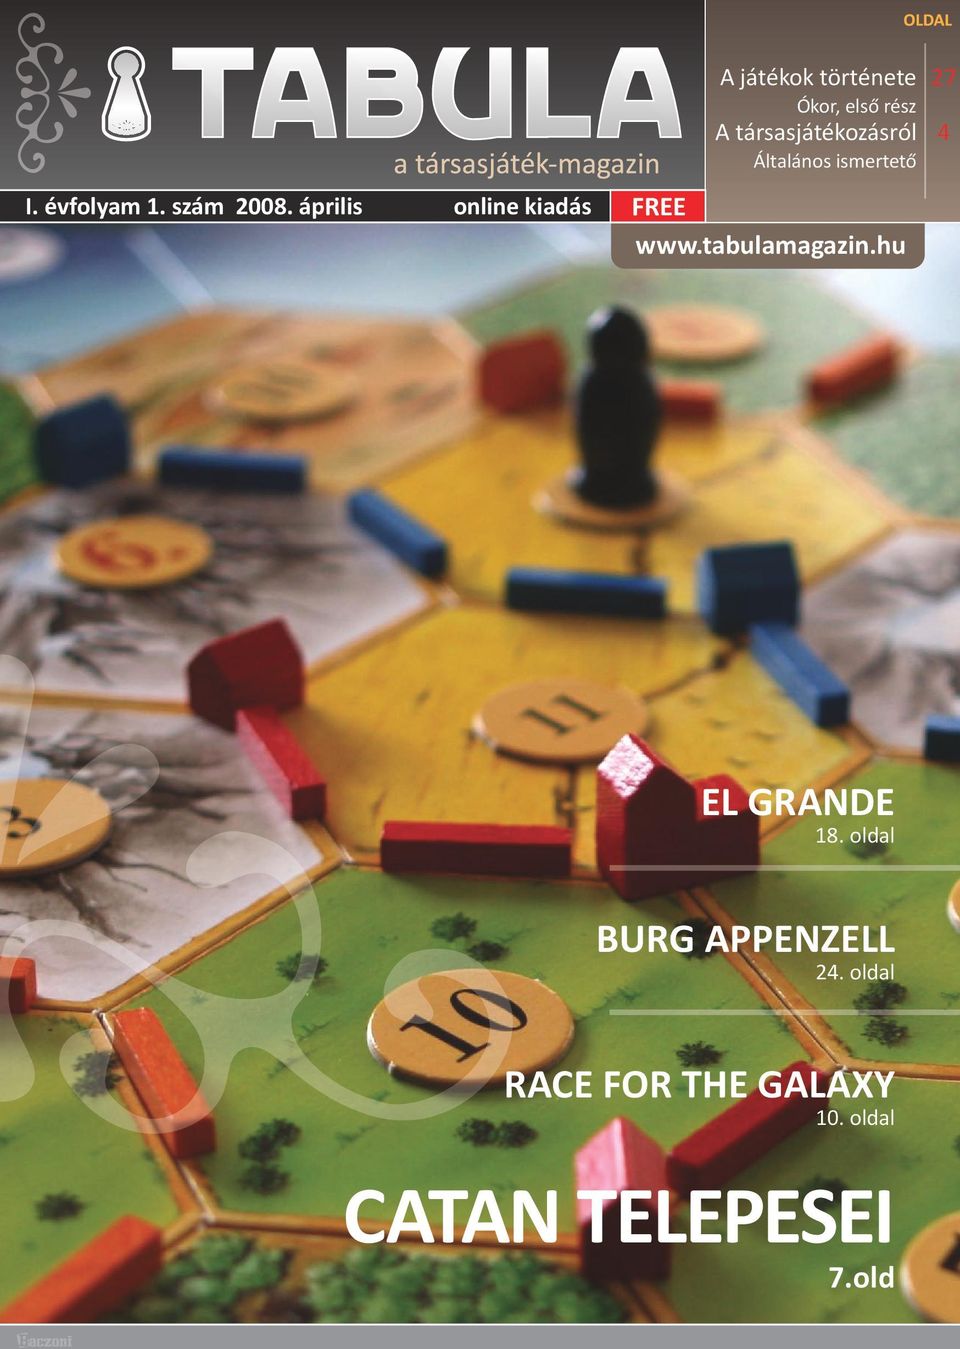 CATAN TELEPESEI EL GRANDE BURG APPENZELL RACE FOR THE GALAXY. 7.old. FREE -  PDF Free Download